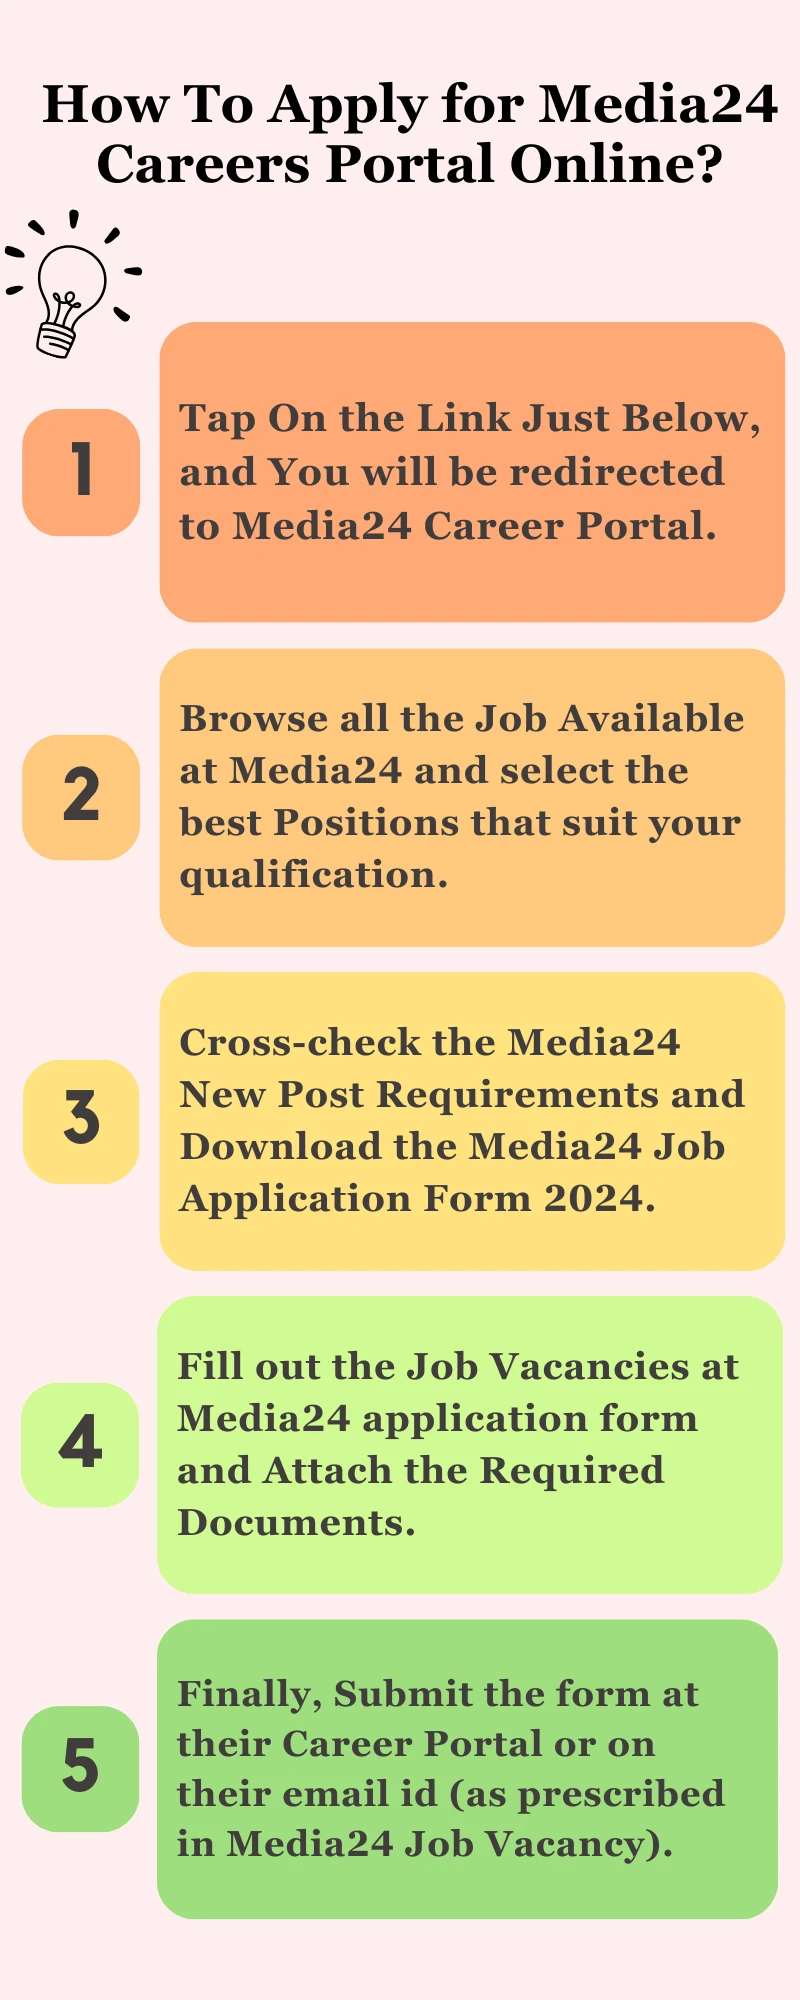 How To Apply for Media24 Careers Portal Online